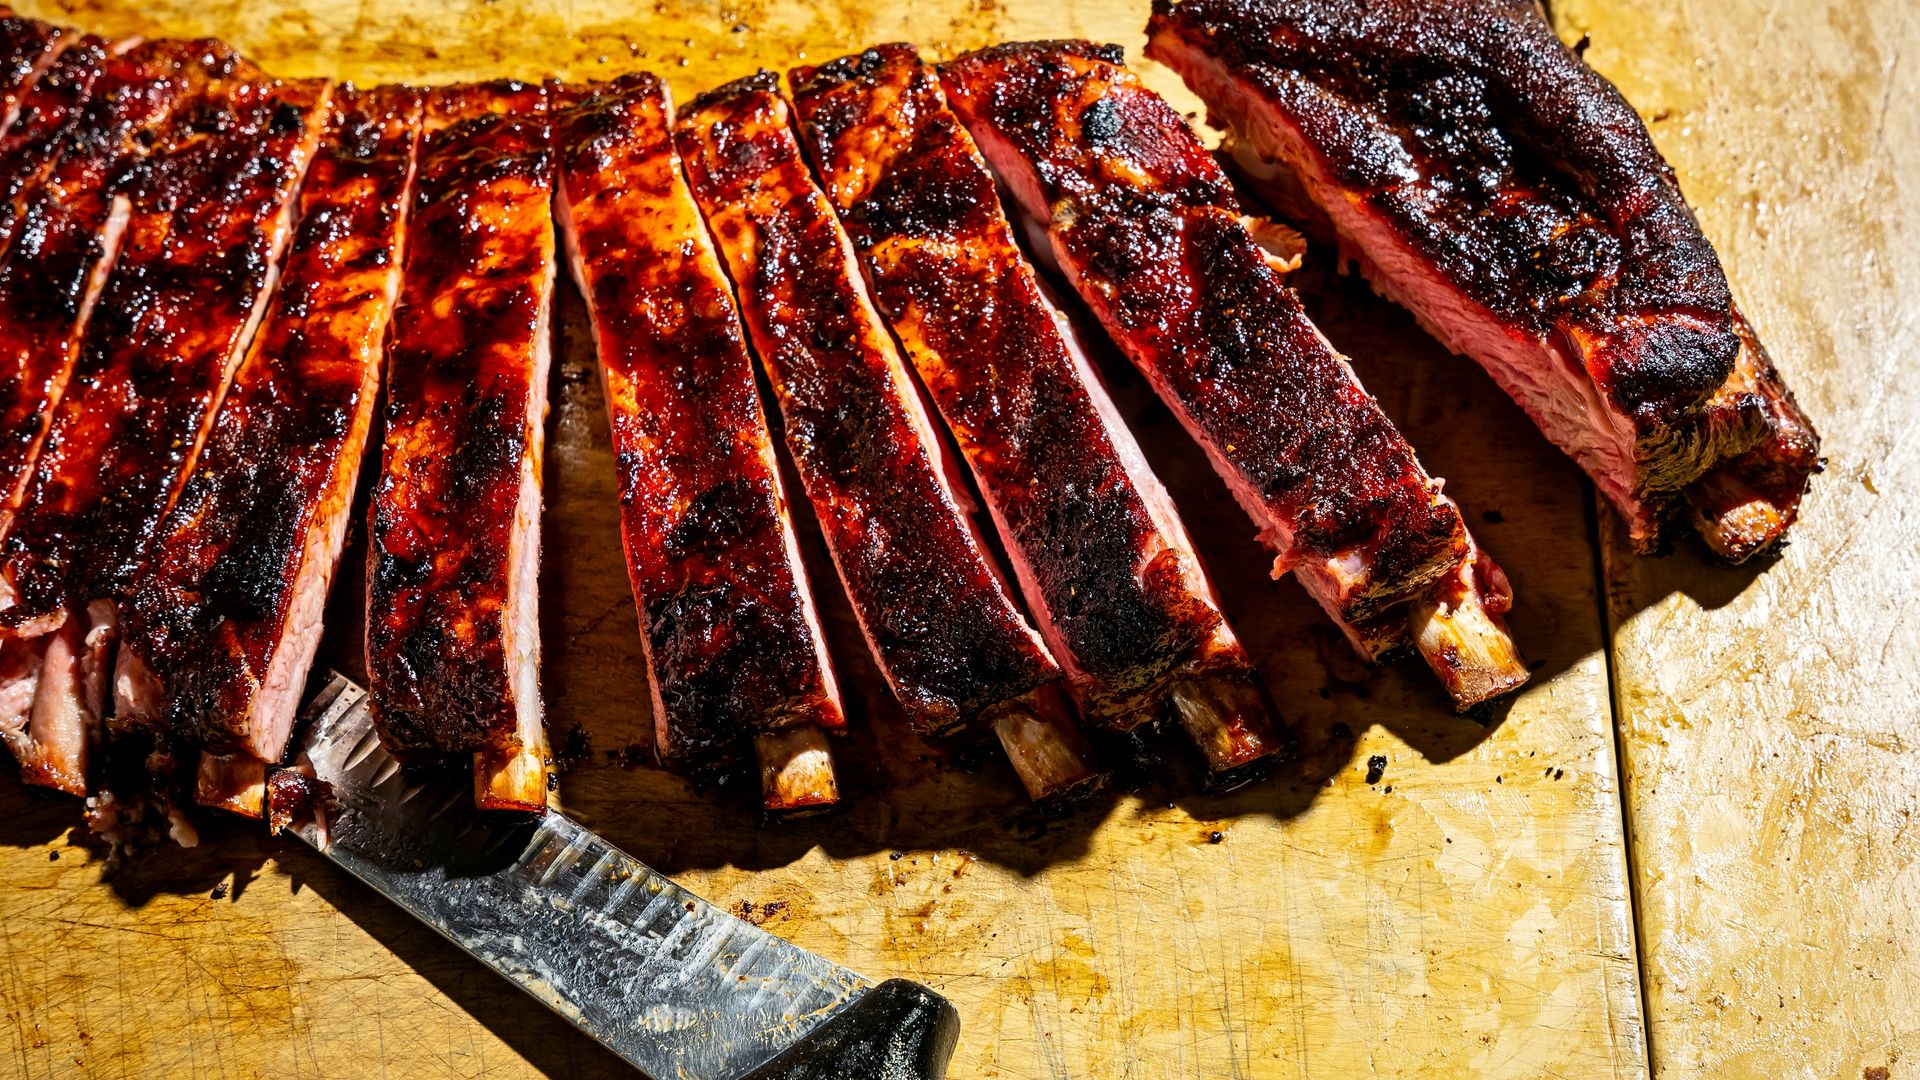 A rack of ribs being sliced